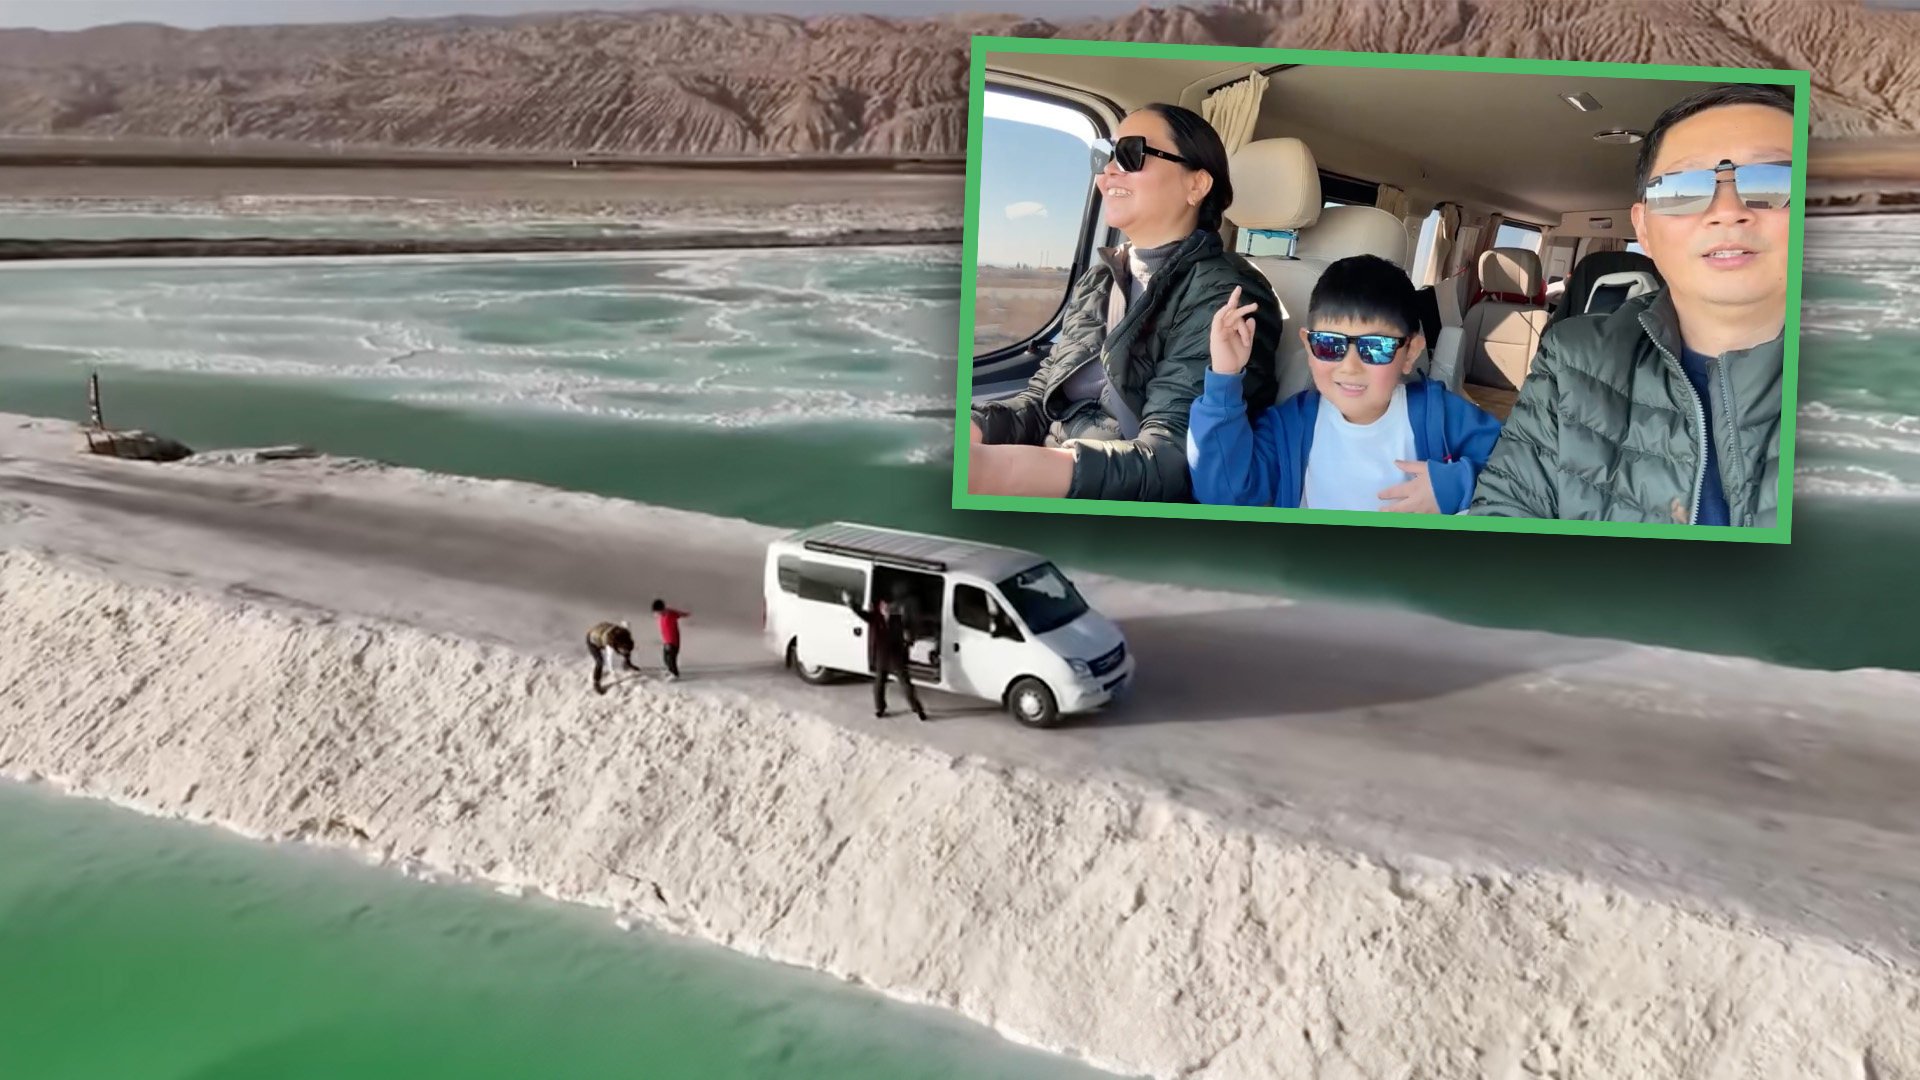 A couple in China have sold up, bought a camper van, and taken their six-year-old son on a self-styled educational nationwide tour. Photo: SCMP composite/Bilibili